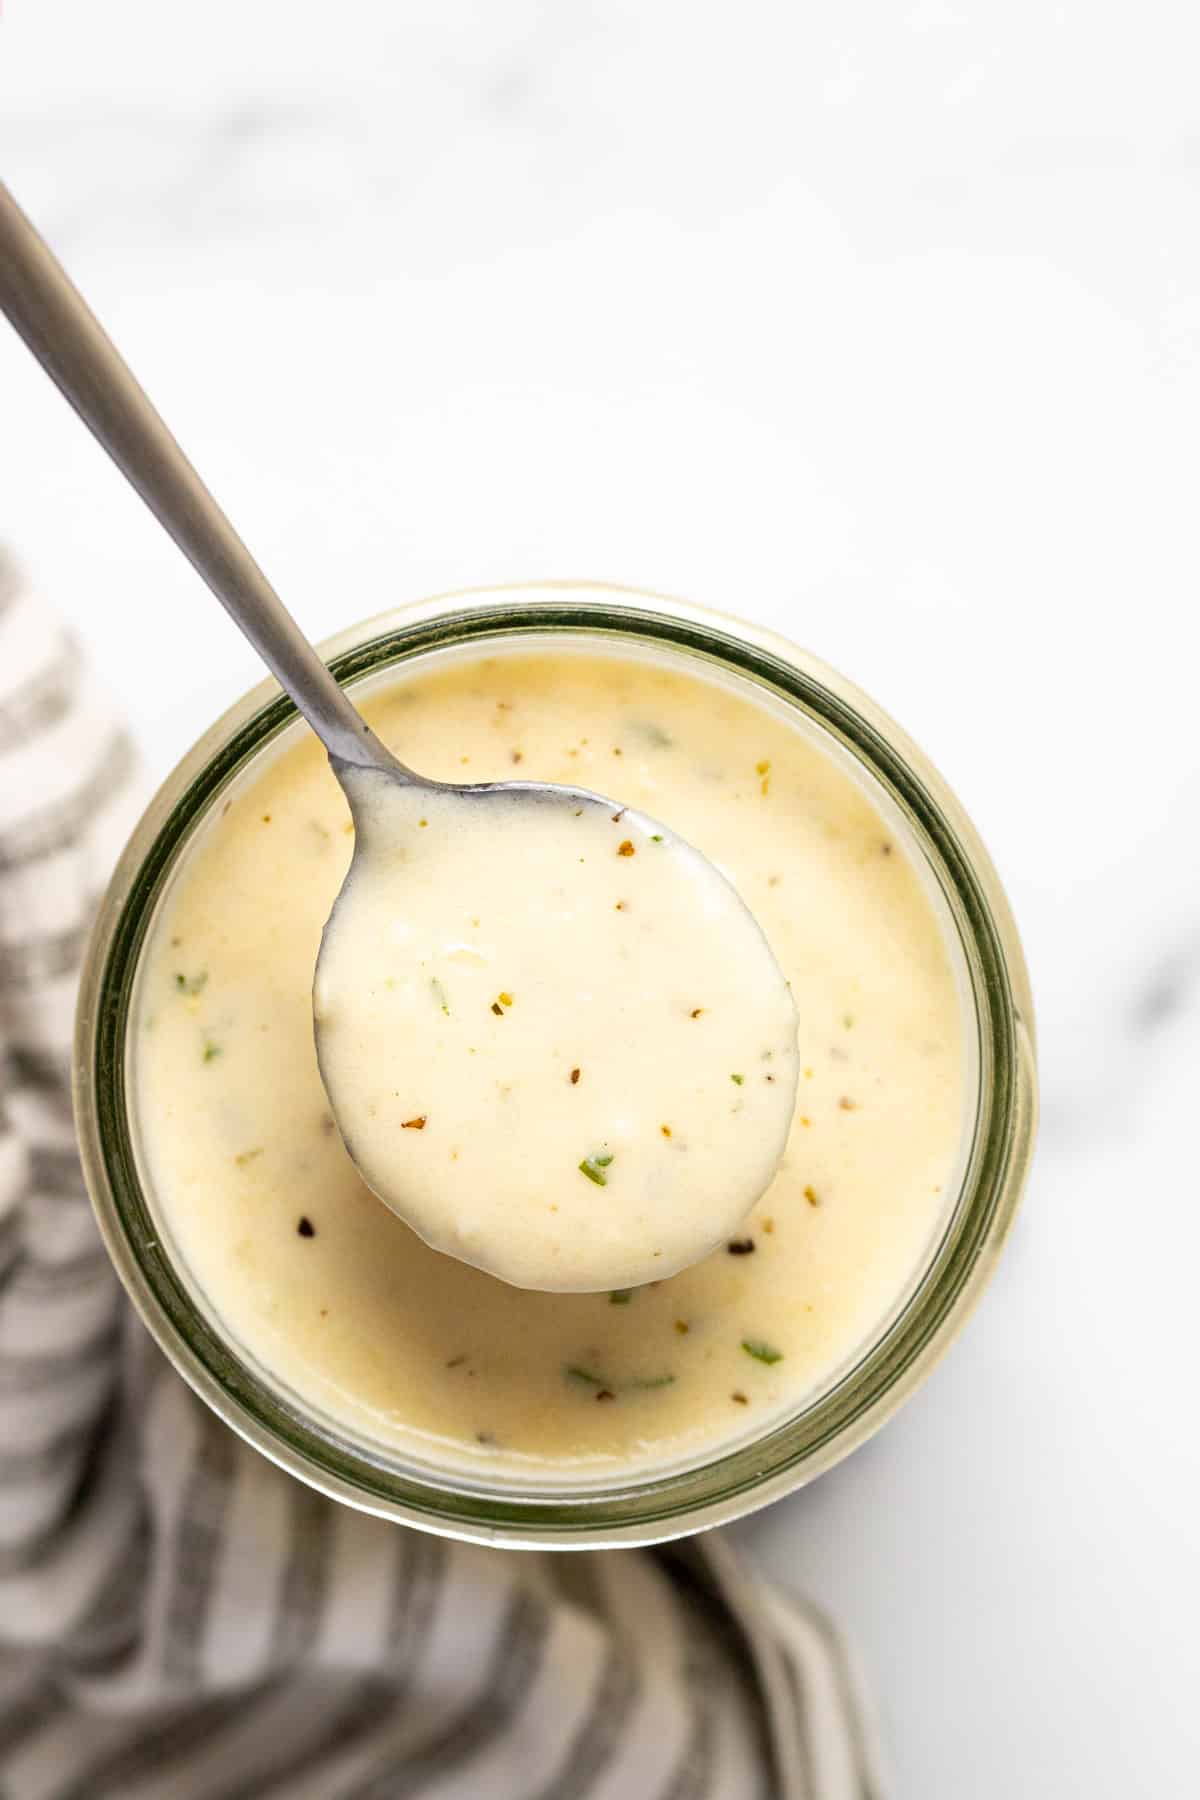 15 Minute Garlic Parmesan Sauce from Midwest Foodie Blog.